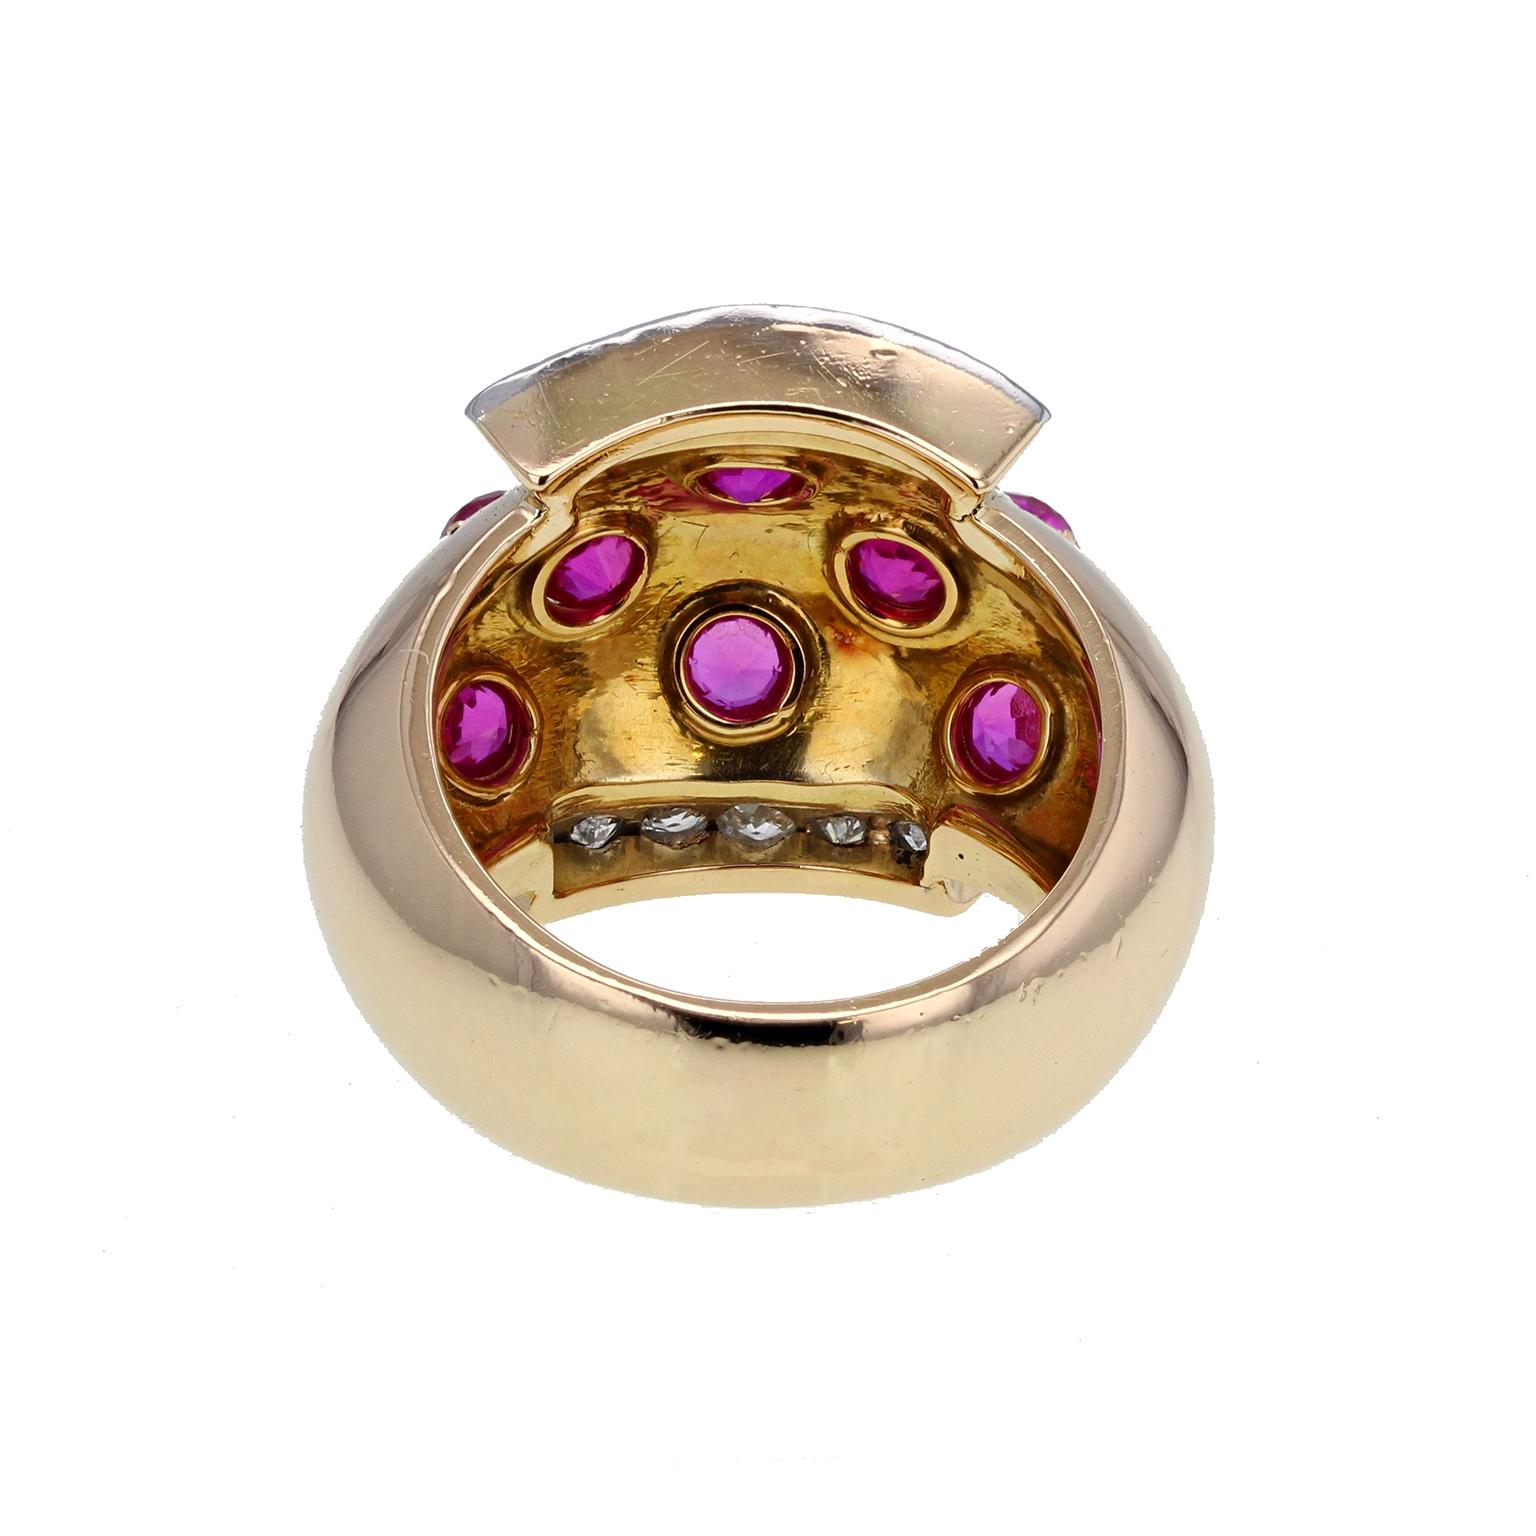 Round Cut Van Cleef & Arpels 1940s Retro Ruby Diamond Gold Ring For Sale